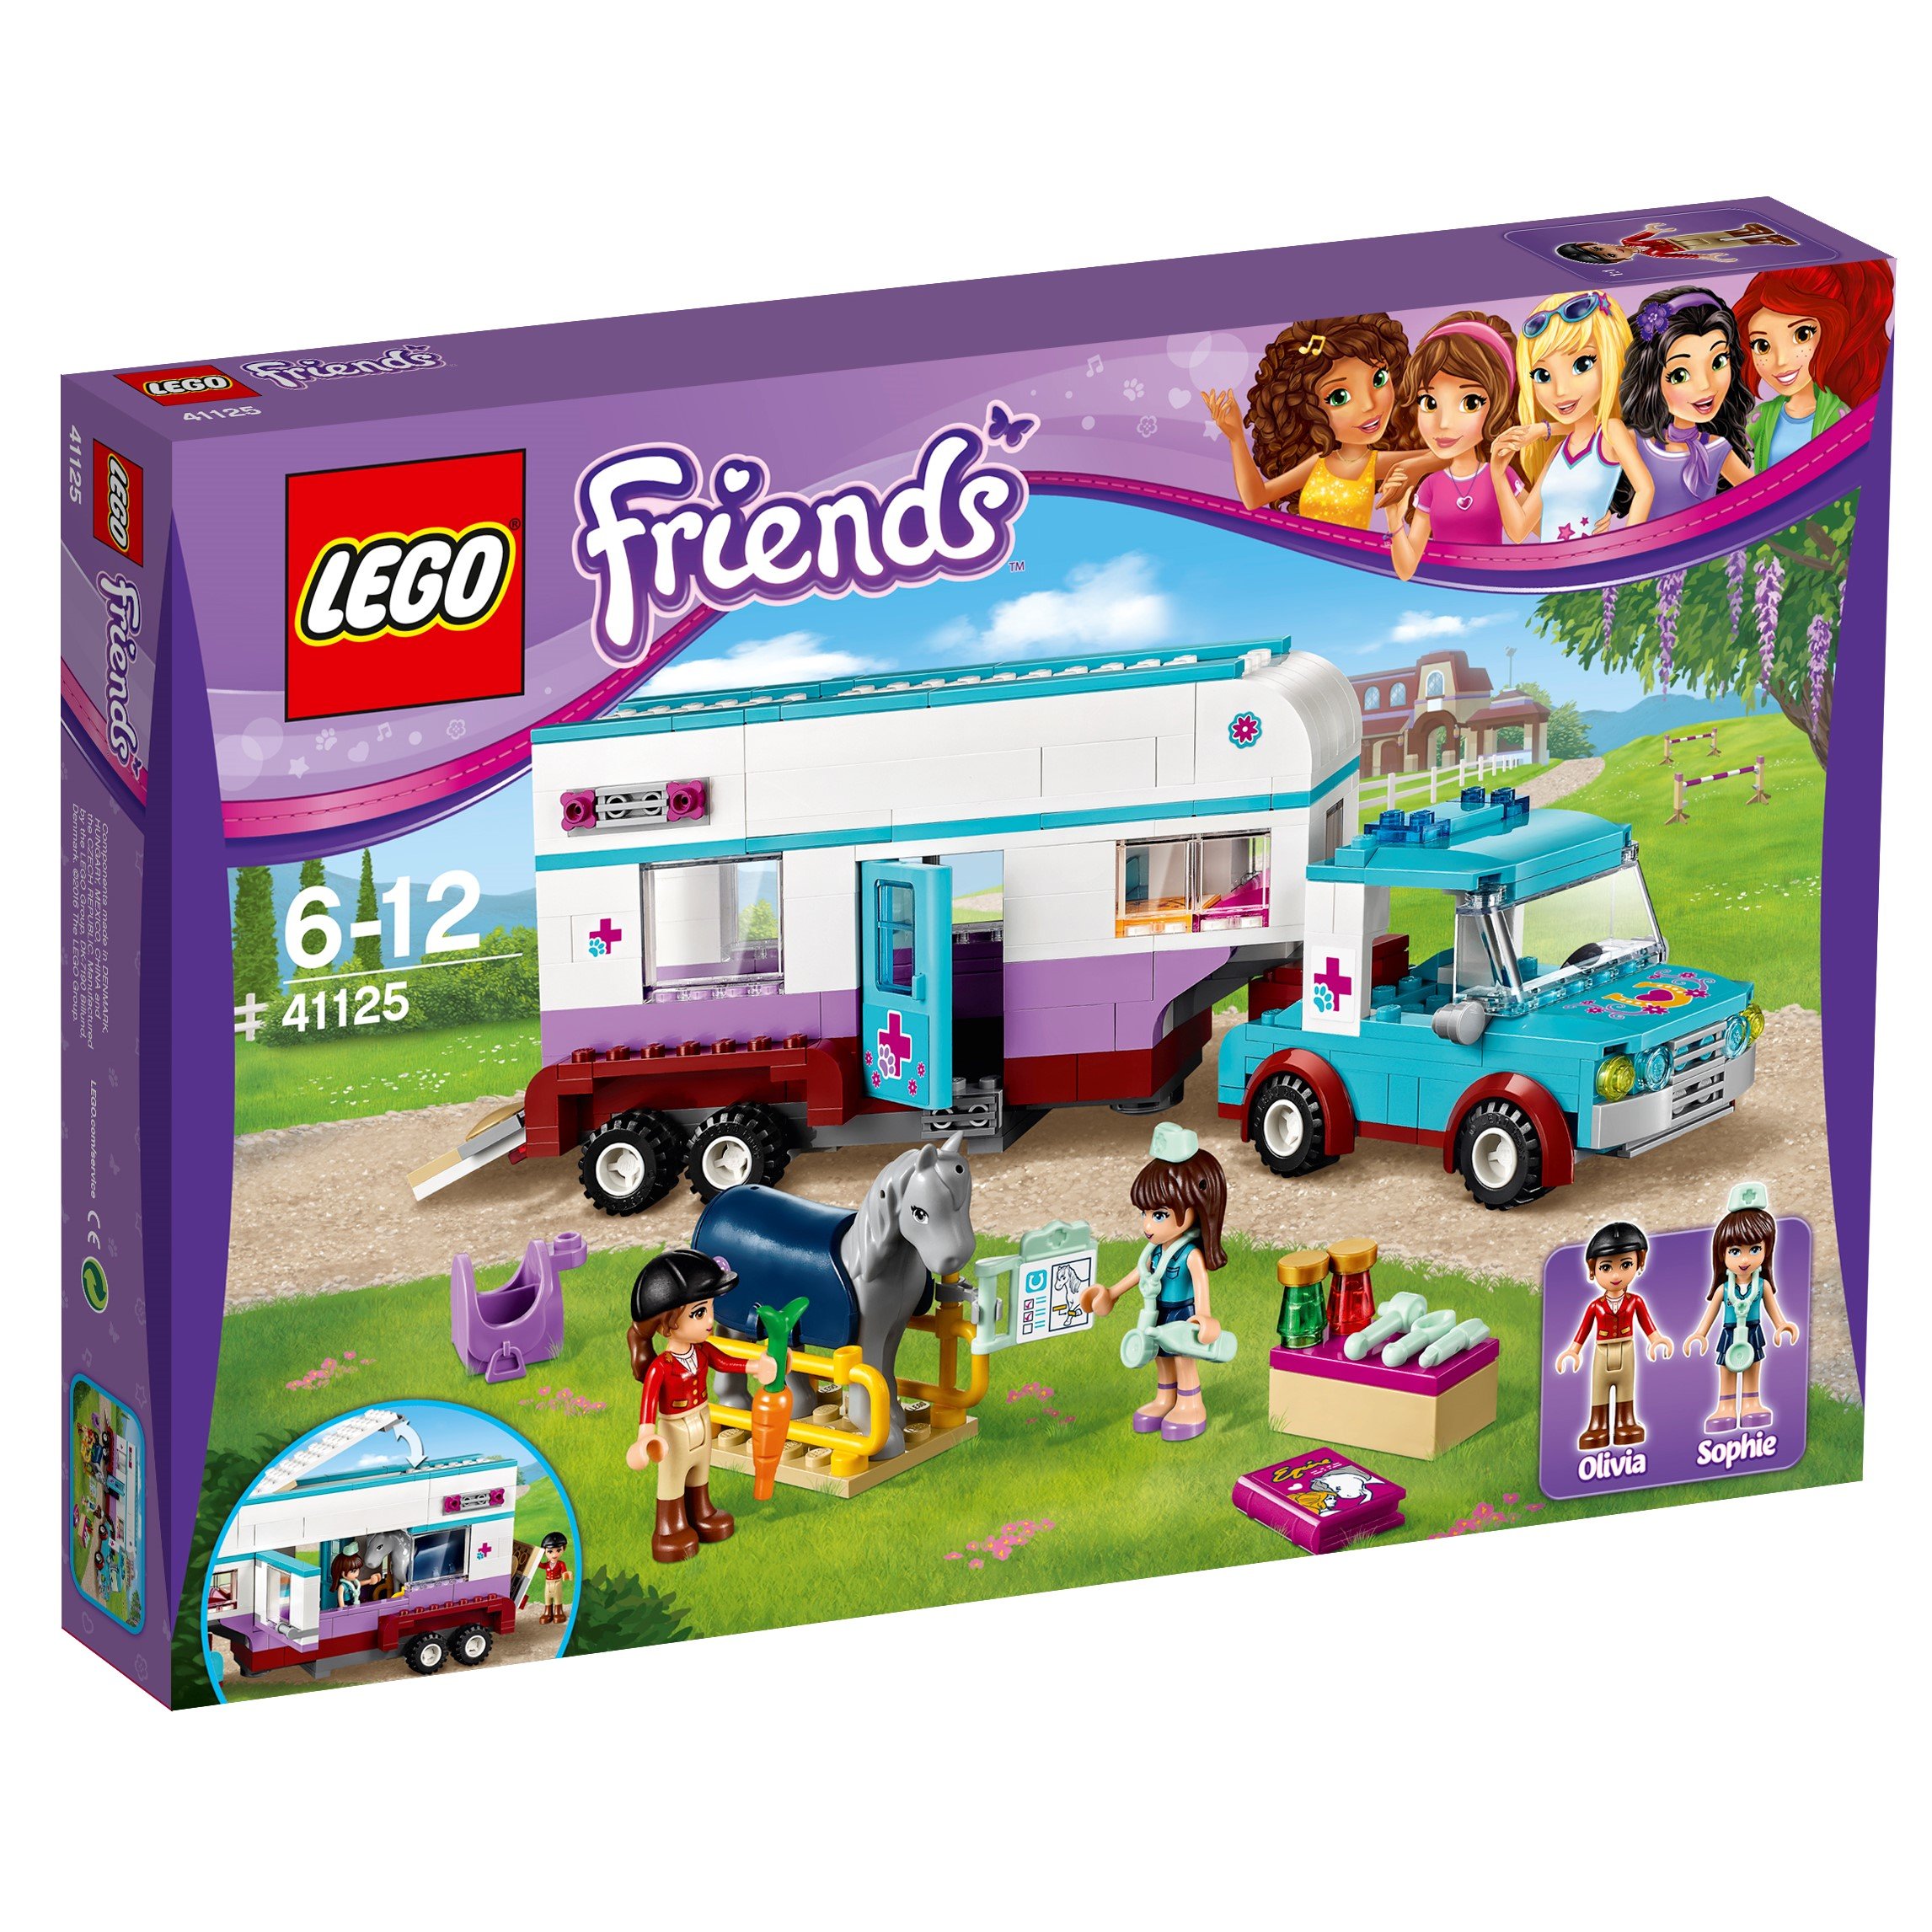 Lego Friends Horse Pendant And Animal Health Toys For Boys And Girls